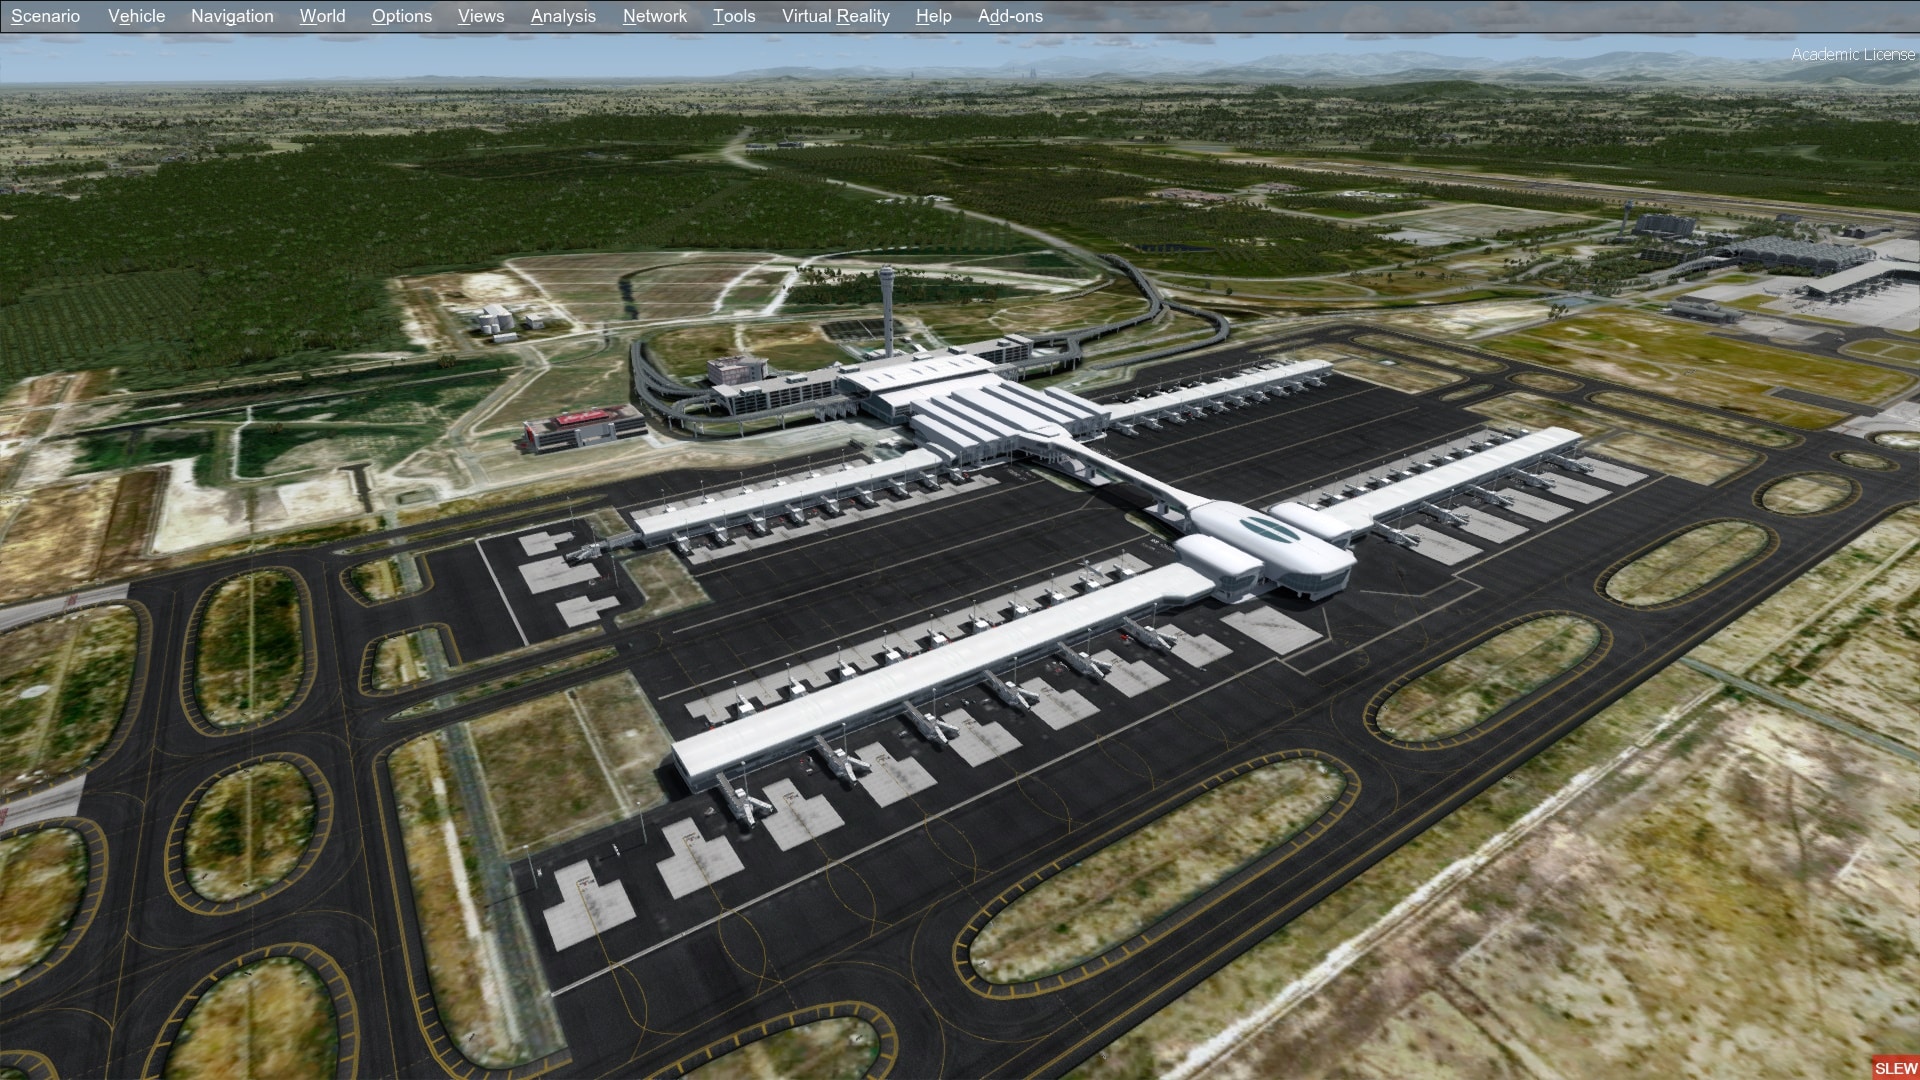 fsx airport scenery at night is gray